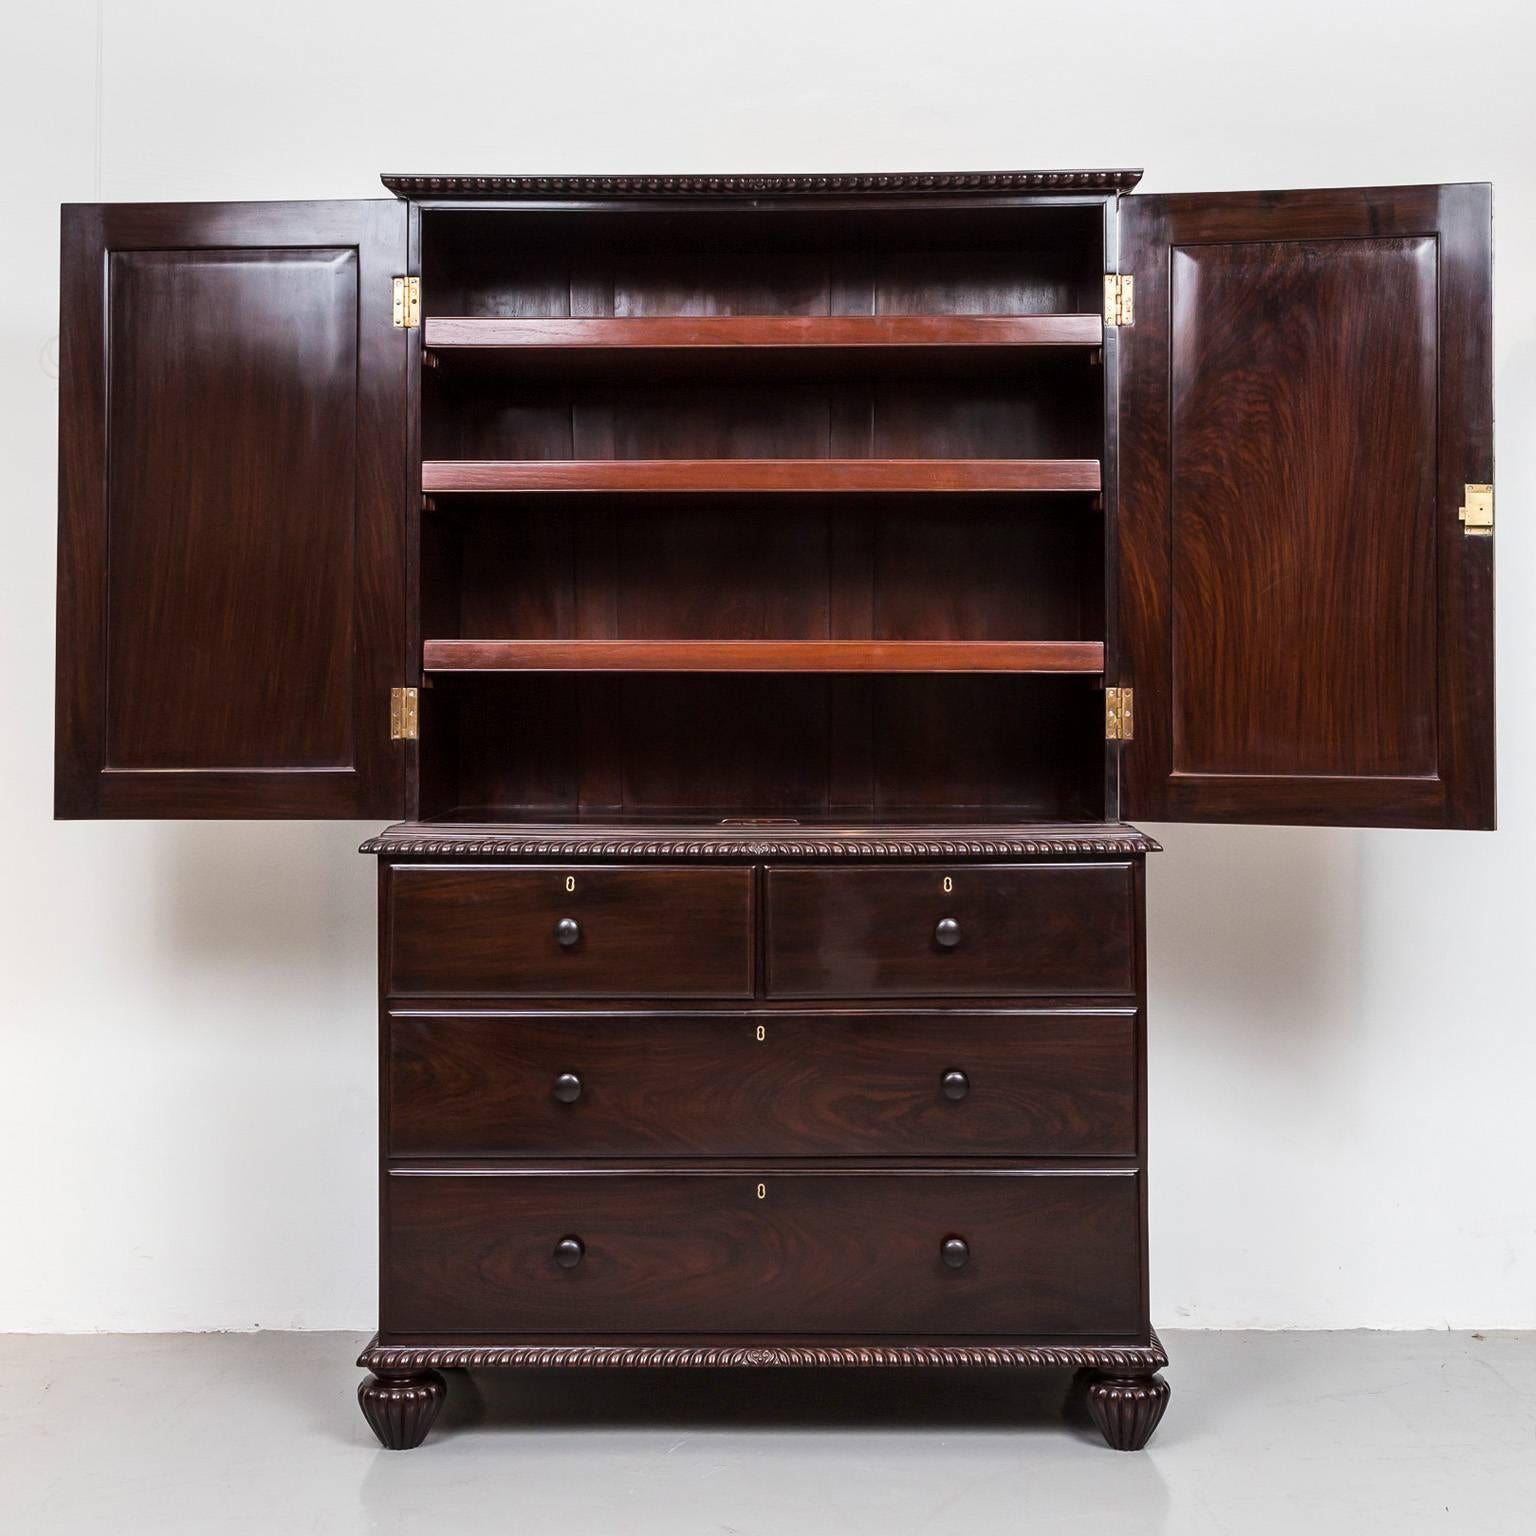 19th Century Anglo-Indian or British Colonial Rosewood Cupboard